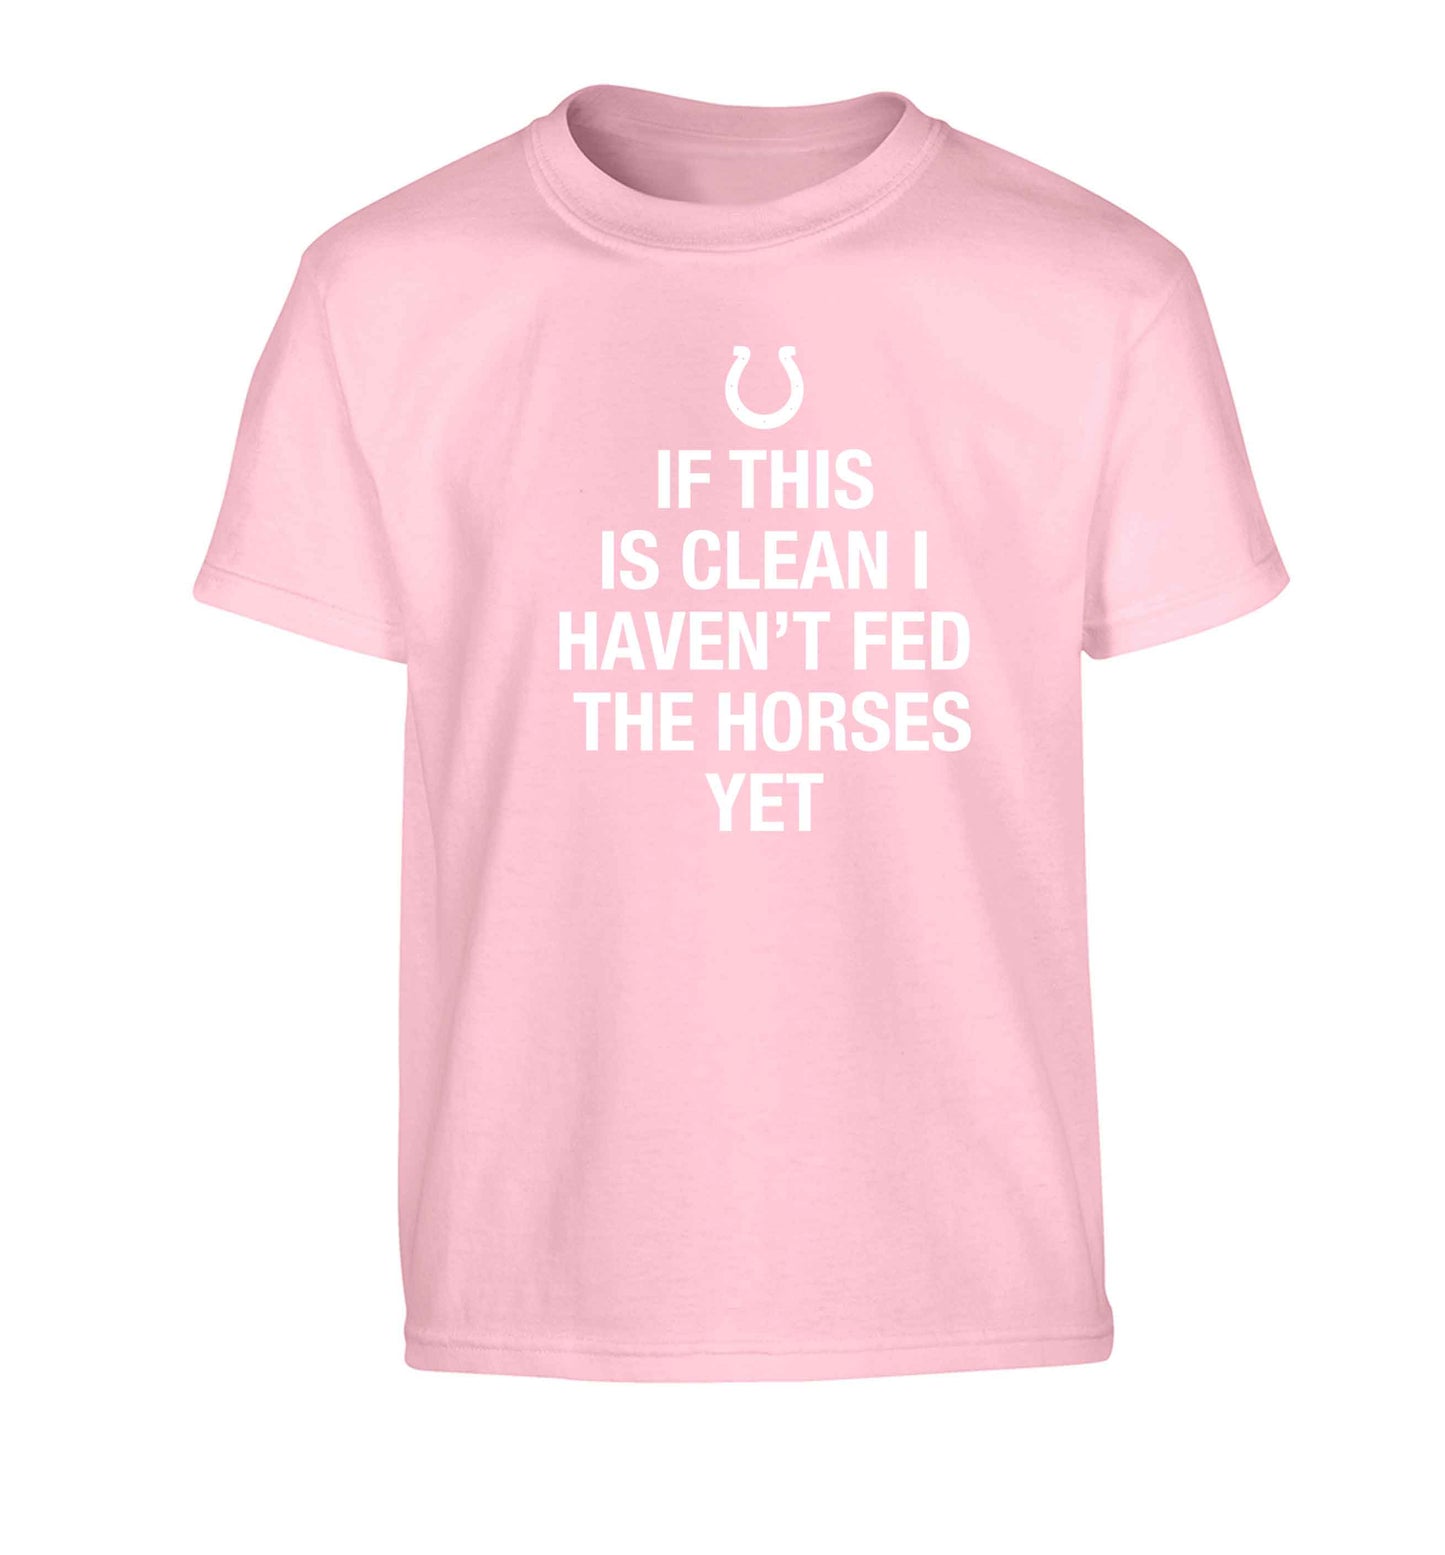 If this isn't clean I haven't fed the horses yet Children's light pink Tshirt 12-13 Years